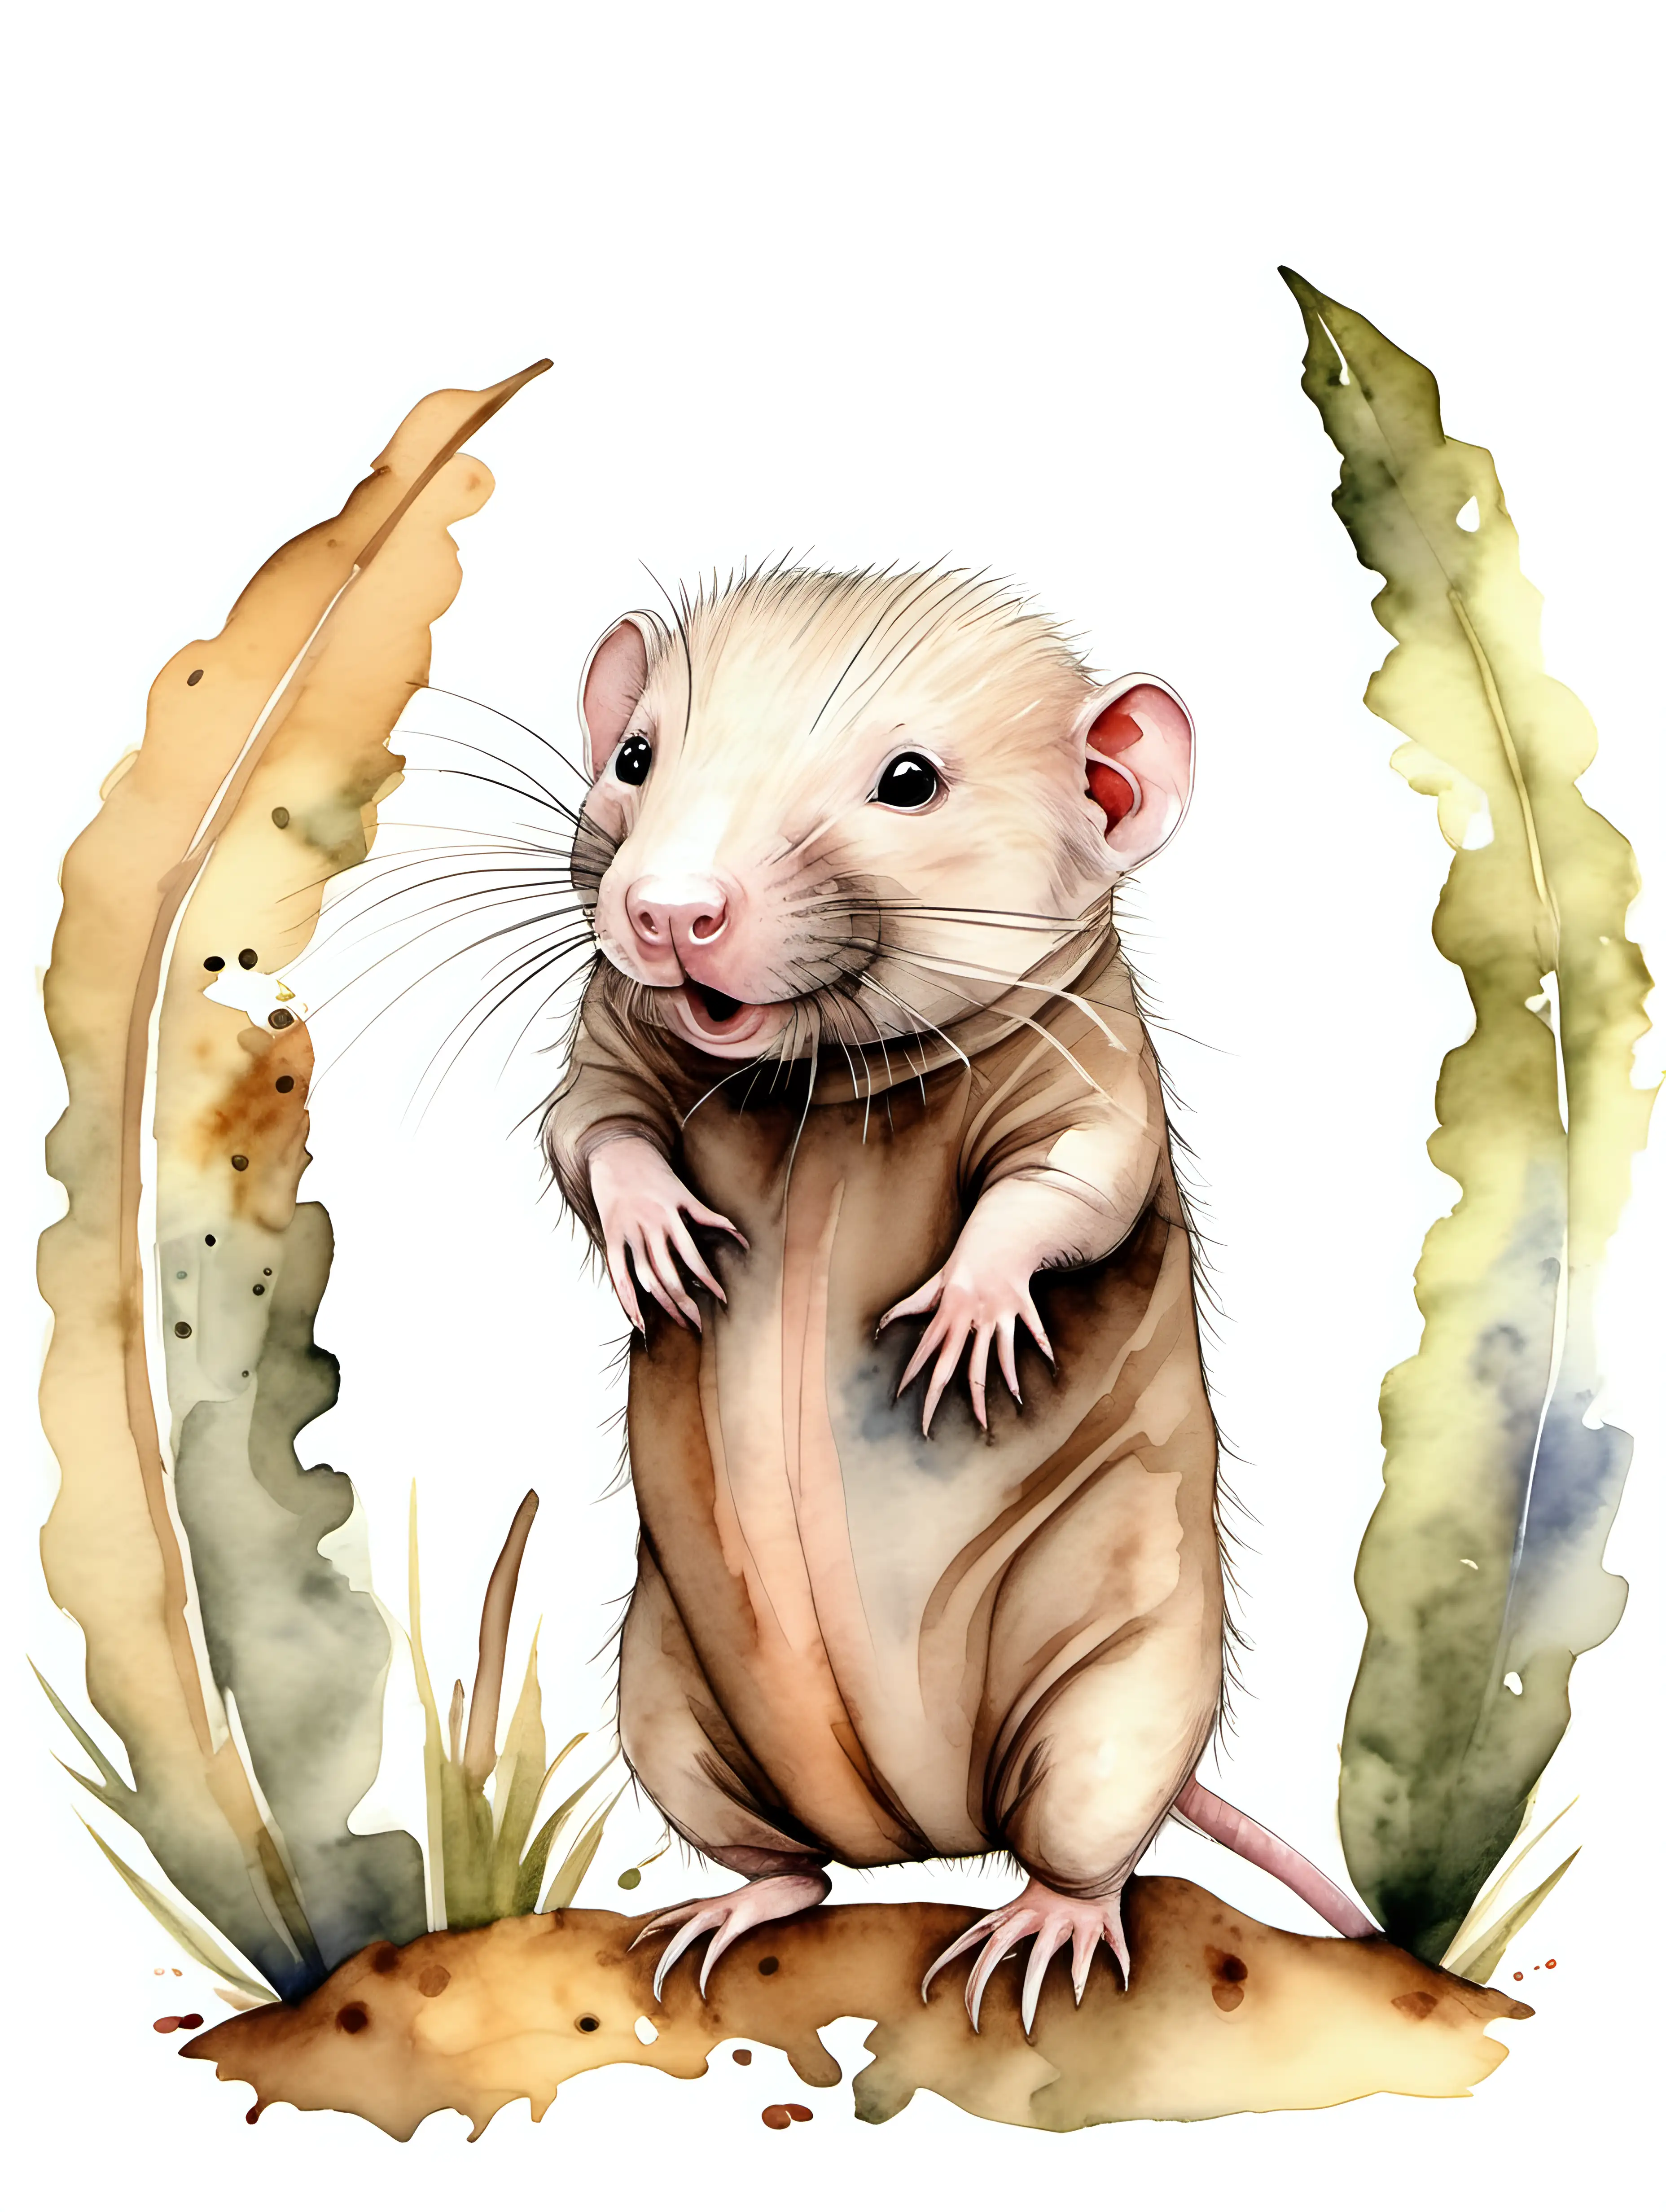 cute baby naked mole rat, watercolour drawing, woodland style.
Isolated white background